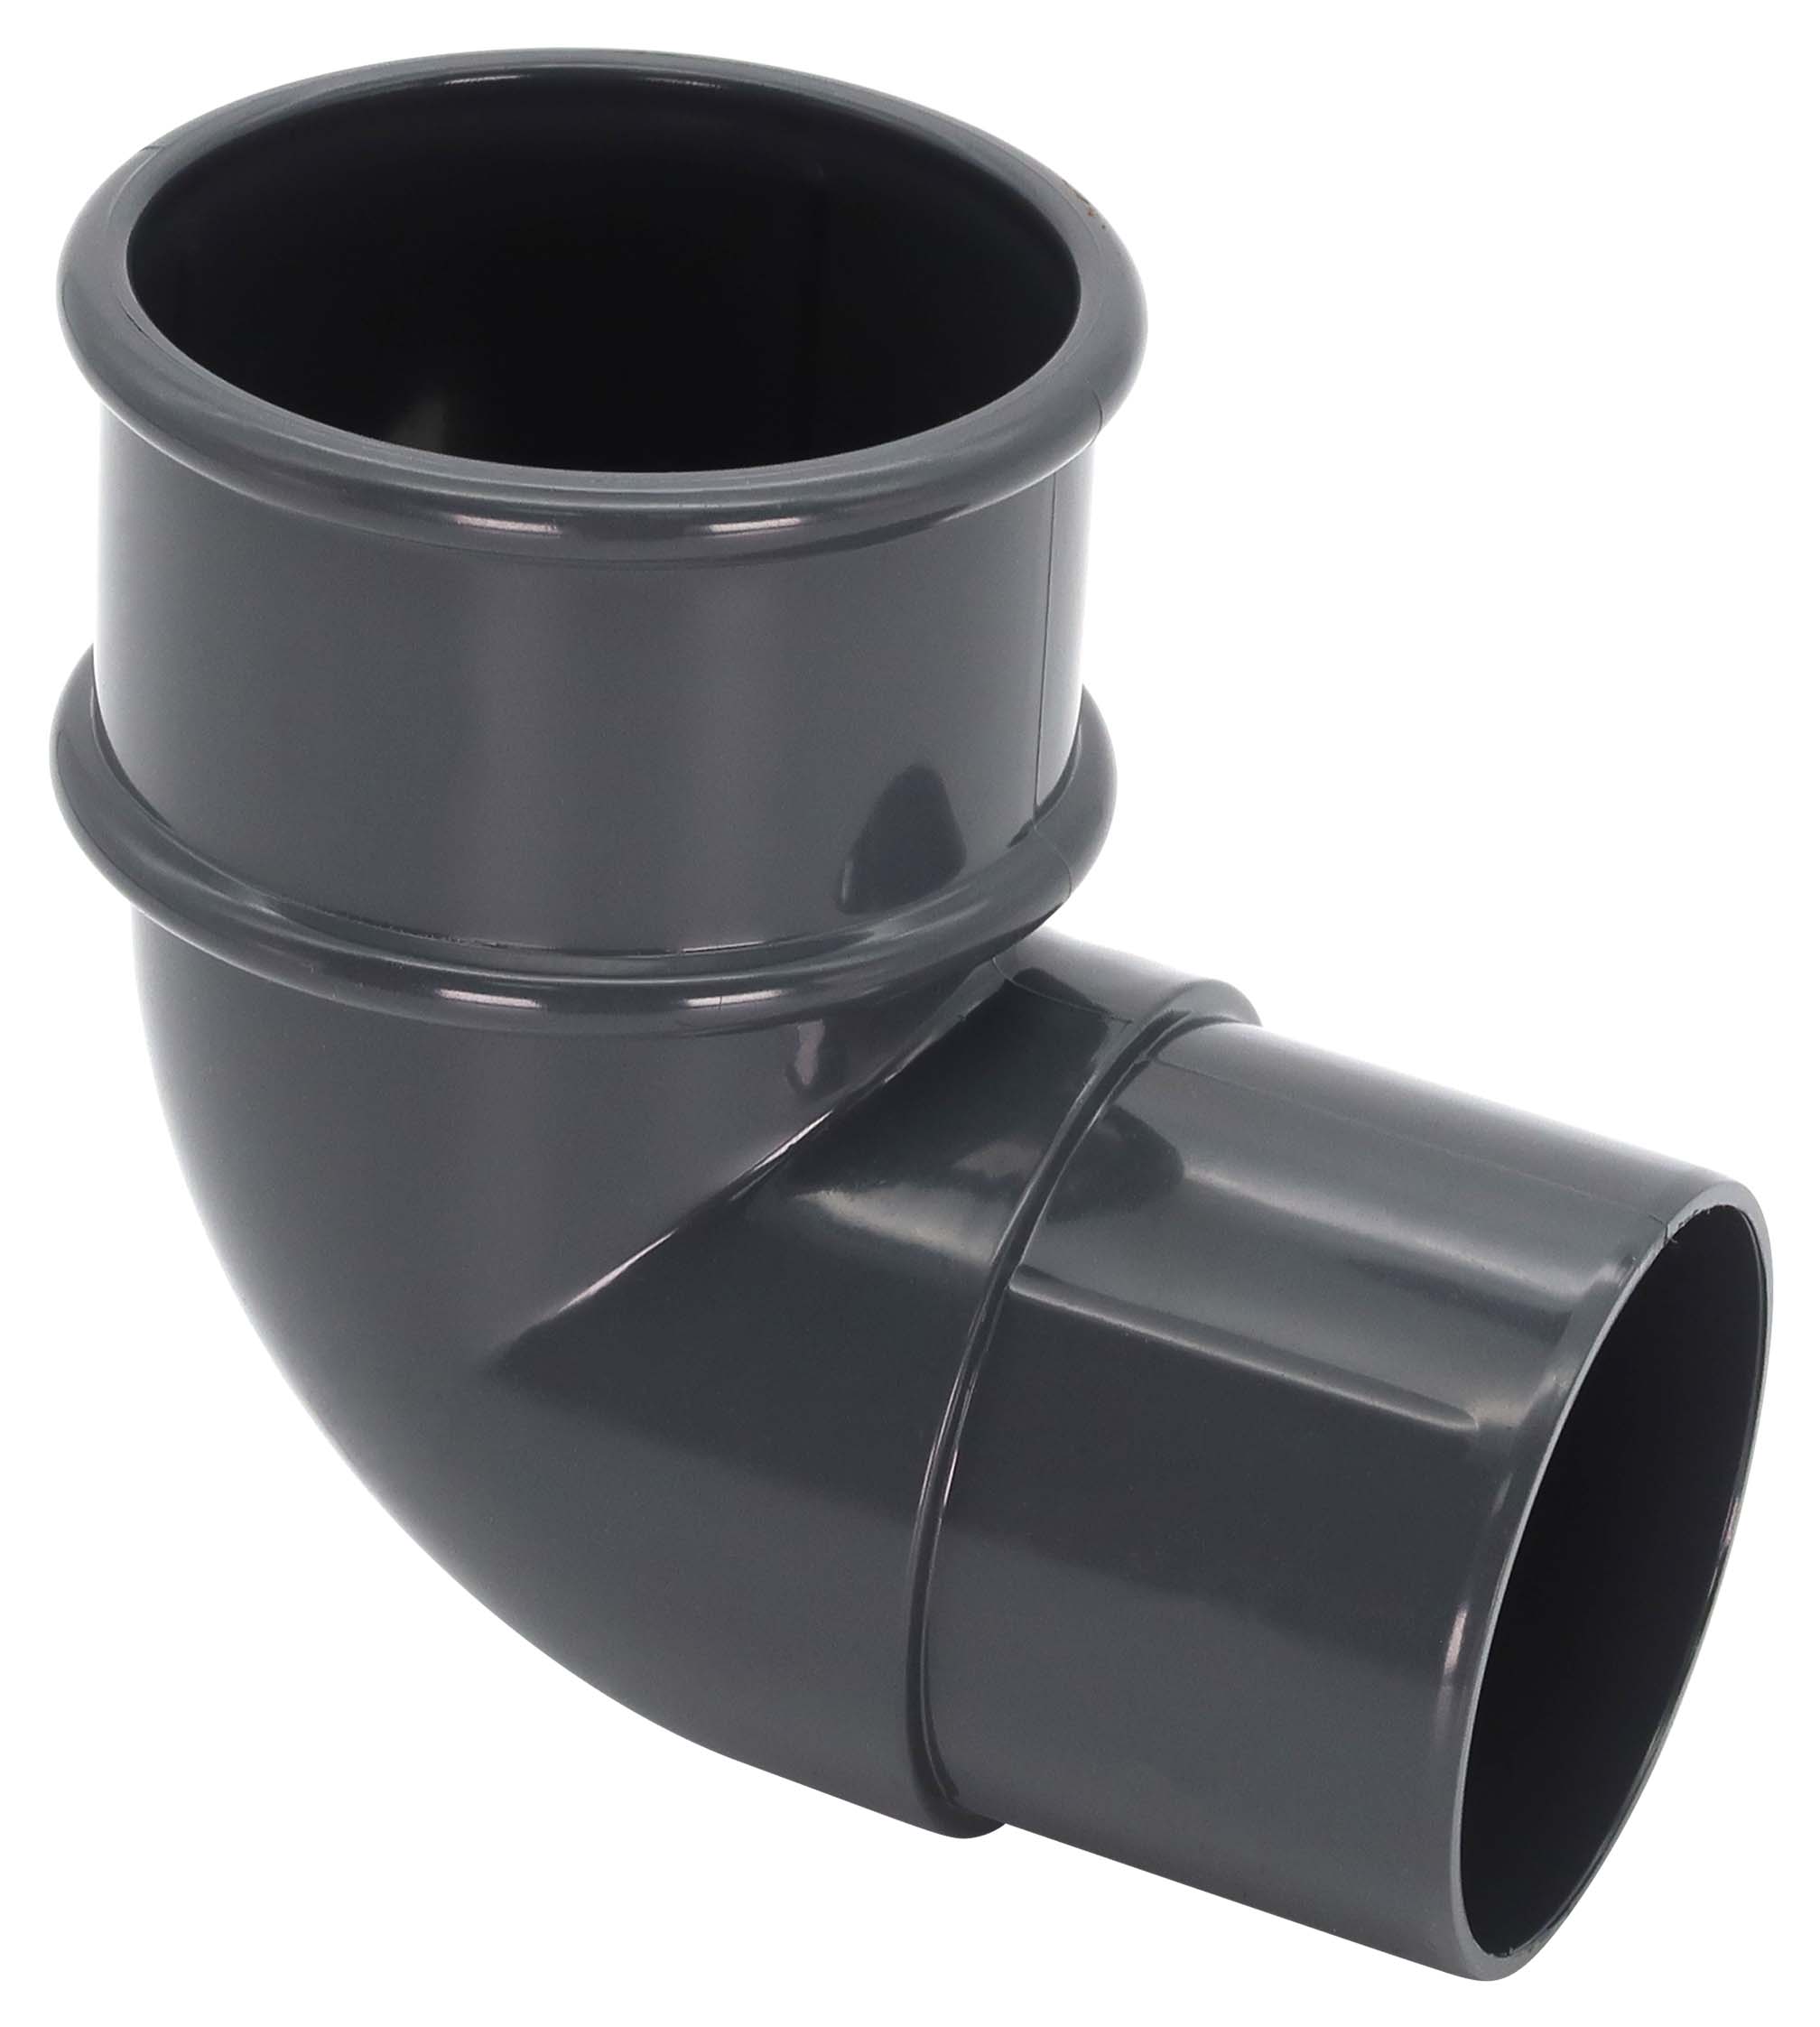 FloPlast 50mm MiniFlo Downpipe Offset Bend 92.5 - Anthracite Grey